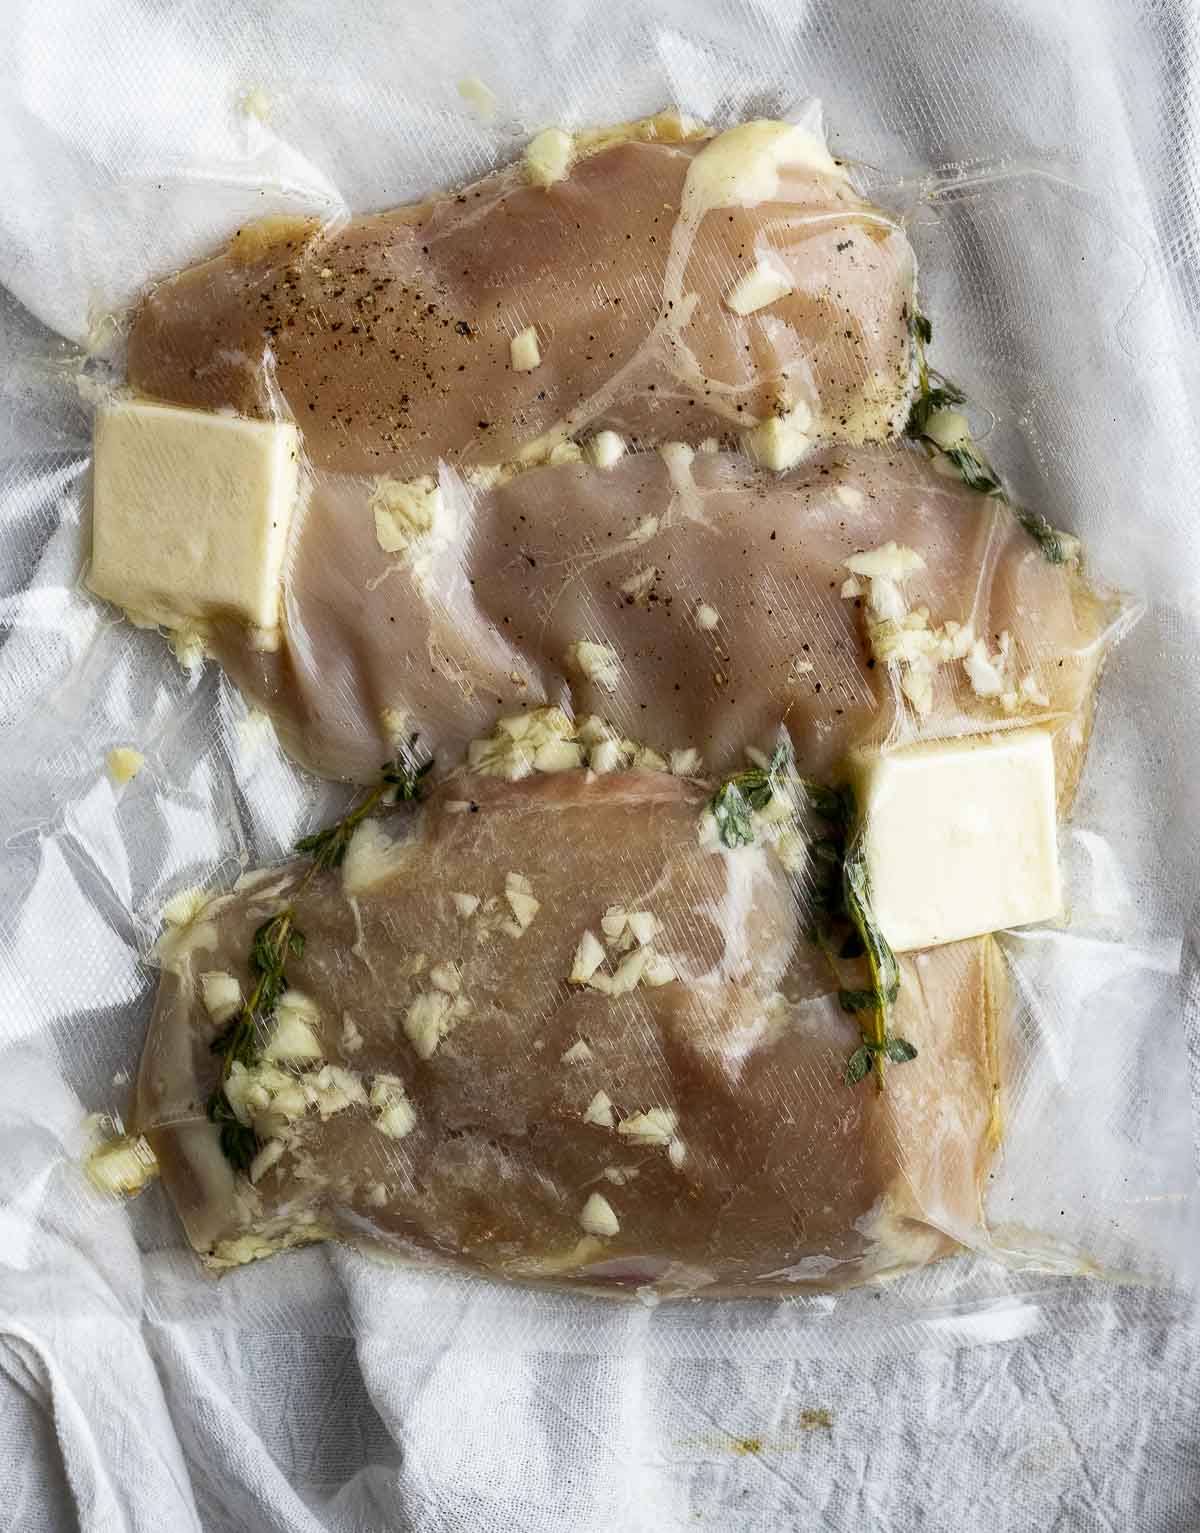 Chicken breasts, butter and seasonings sealed in a bag.